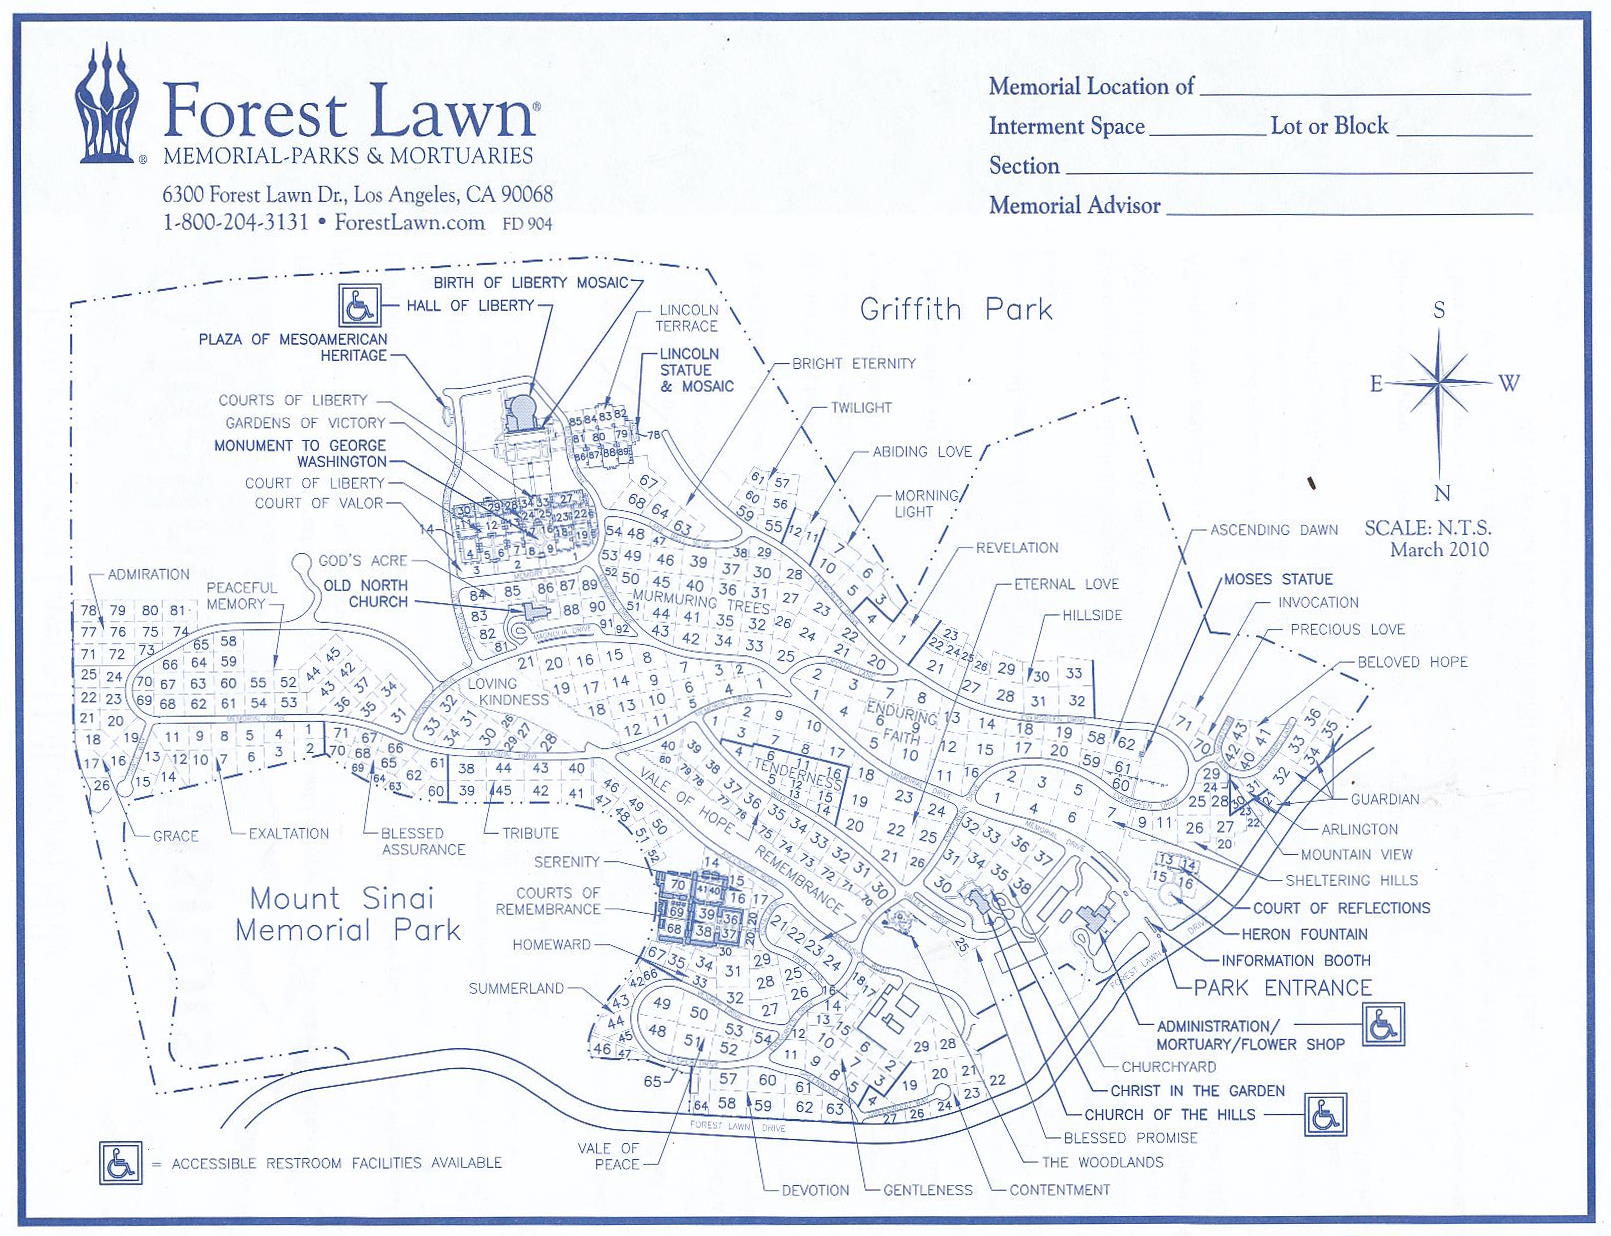 Map of Forest Lawn Memorial Park in Hollywood Hills, Los Angeles, California